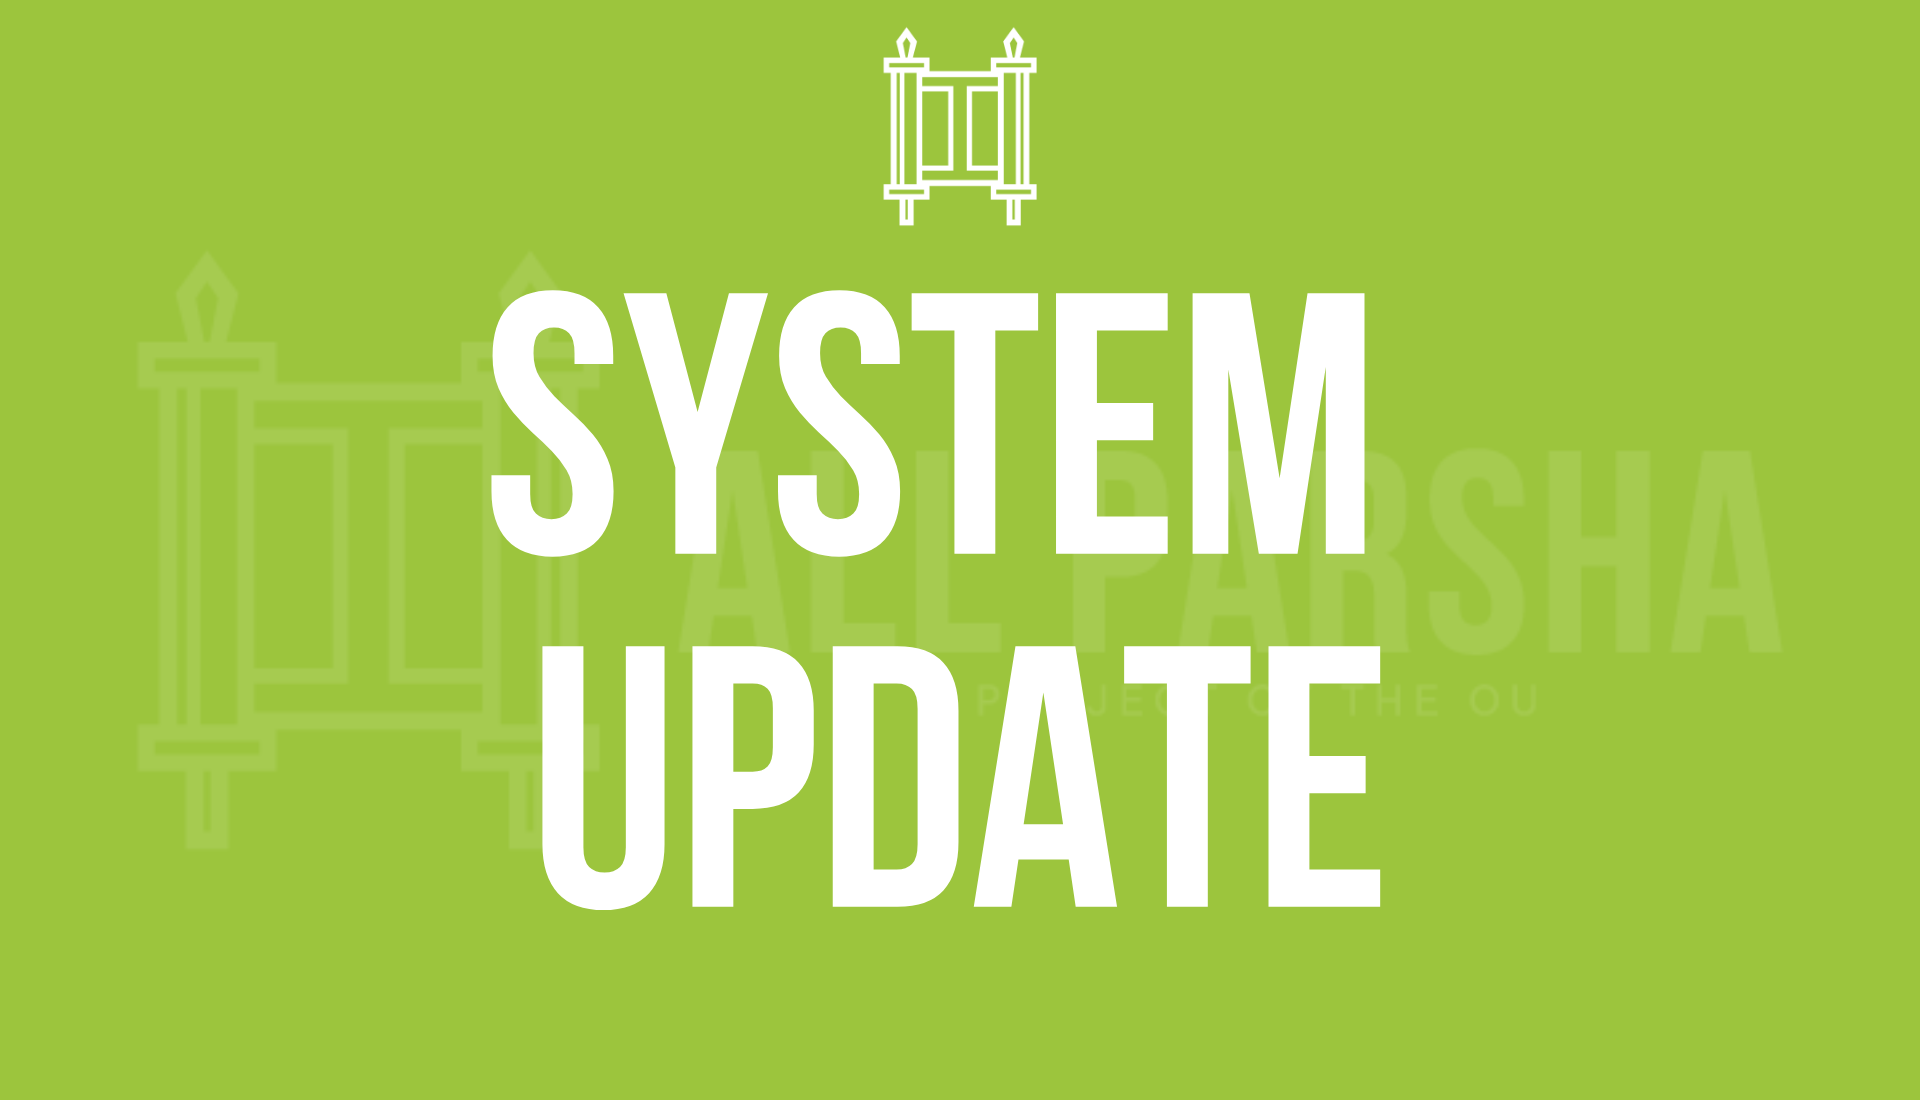 IMPORTANT SYSTEM UPDATE